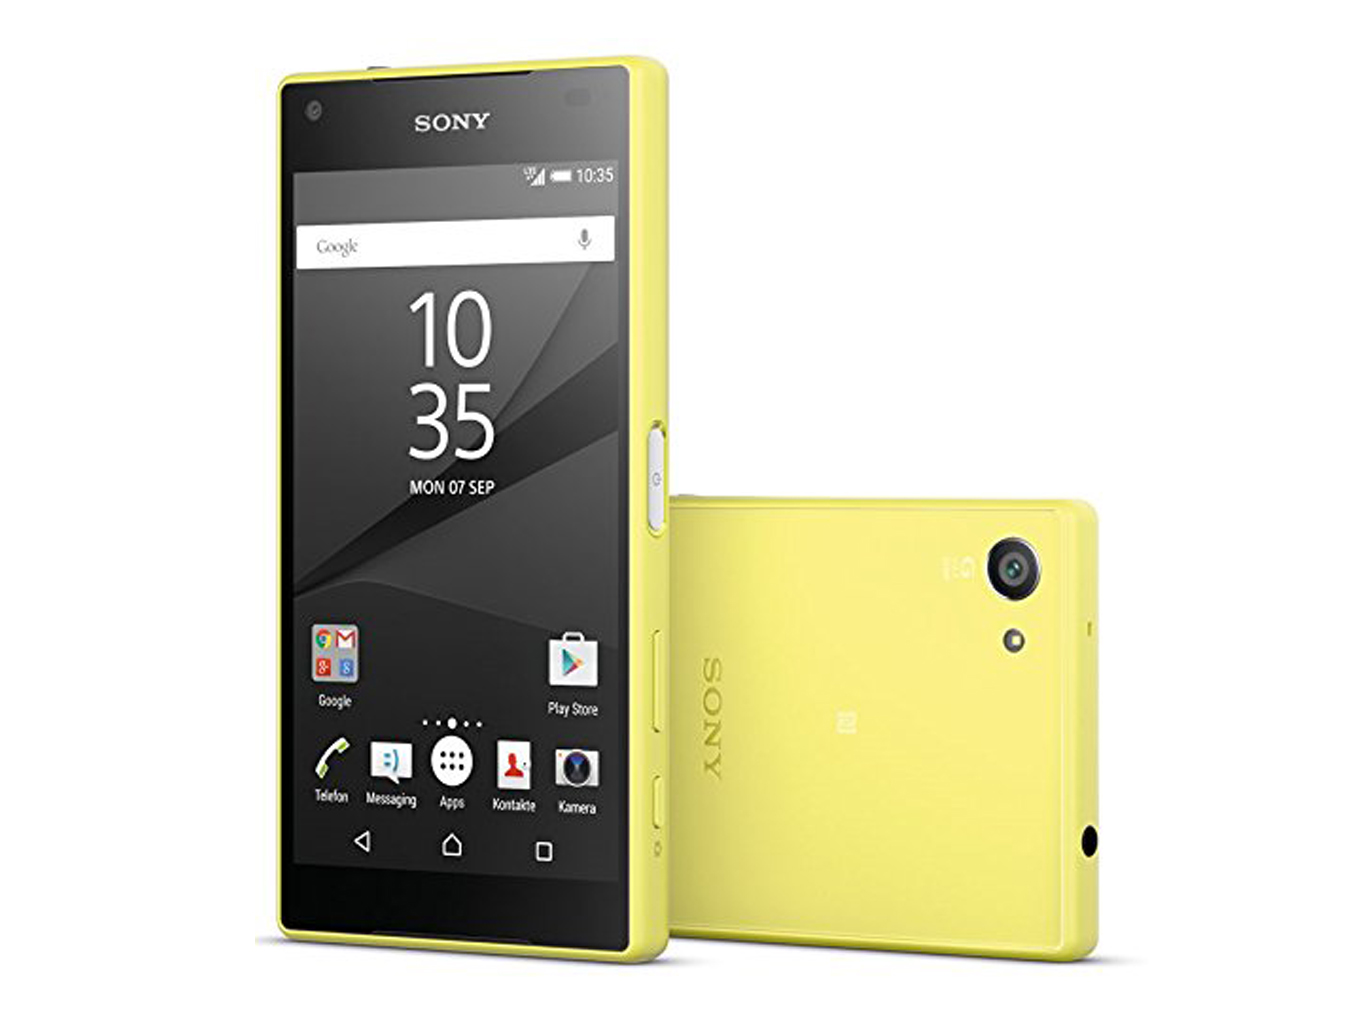 Sony Xperia Z5 Compact Smartphone Review Notebookcheck Net Reviews